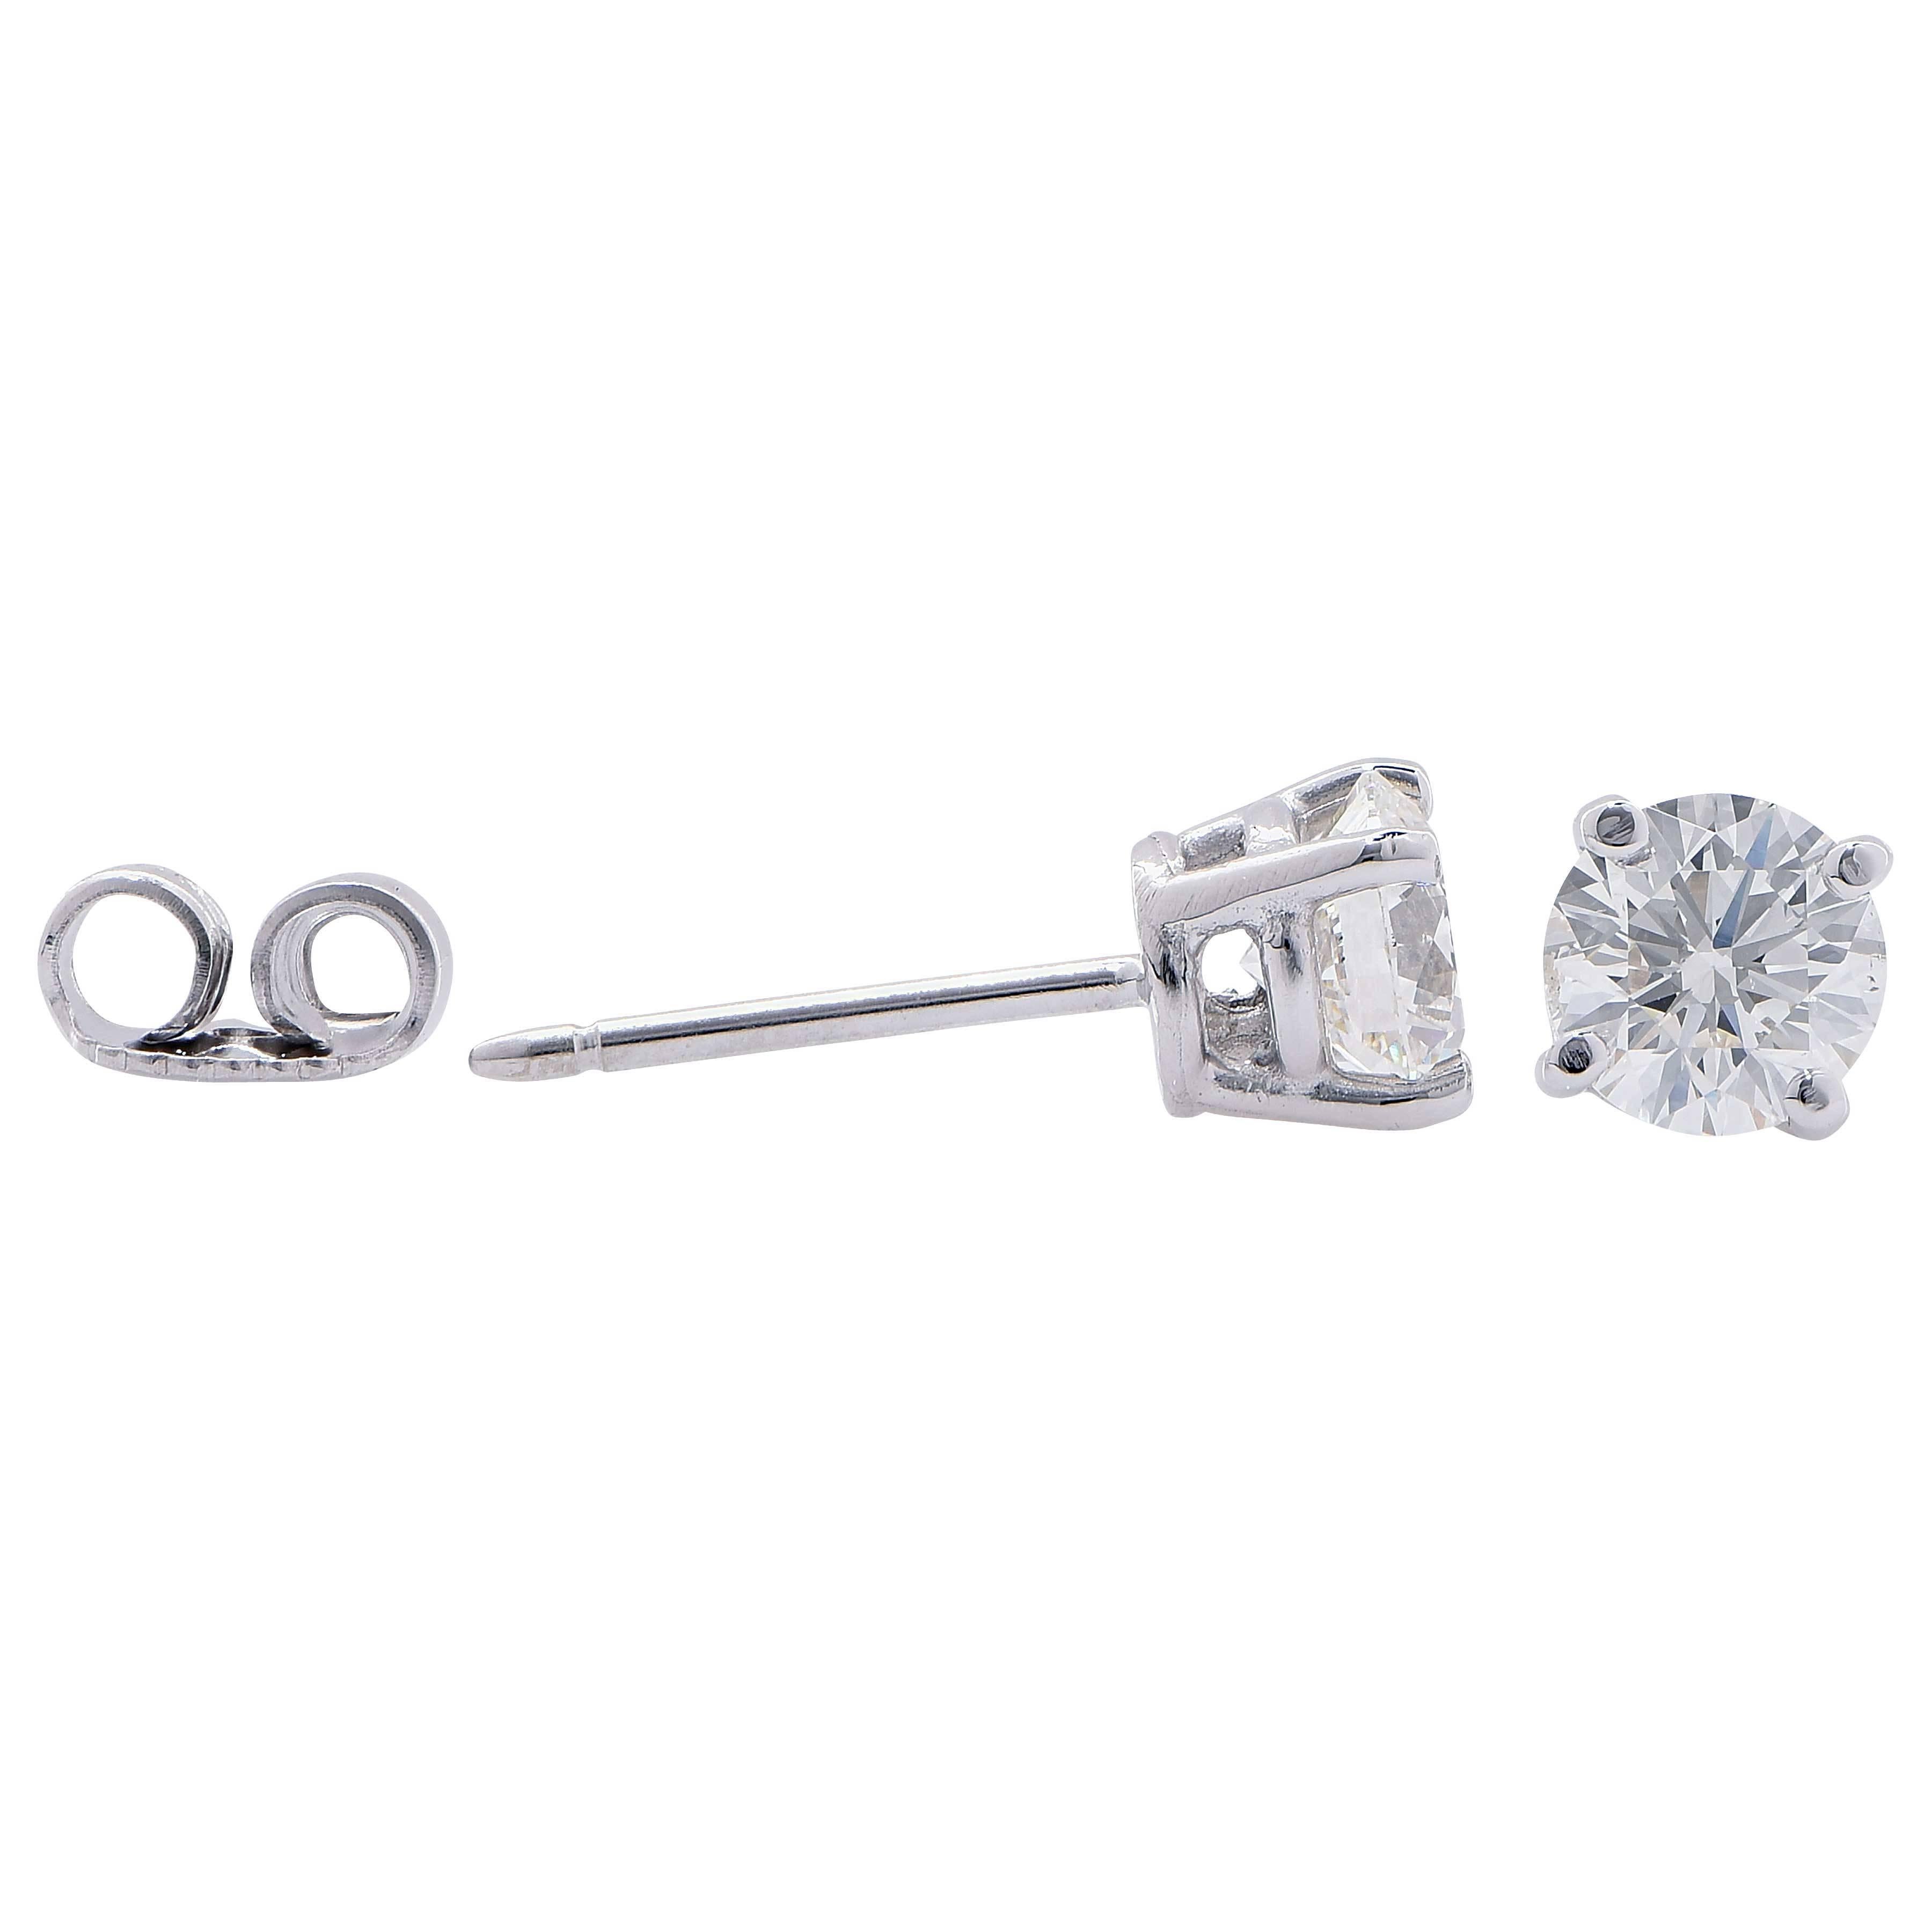 1.4 carat total weight diamond studs featuring two round brilliant cut diamonds with a total weight of 1.40 carats I/J Color VS2/SI1 Clarity set in 18 Karat White Gold.

Metal Type: 18 Karat White Gold, Stamped and Tested
Metal Weight: 2.6 Grams
